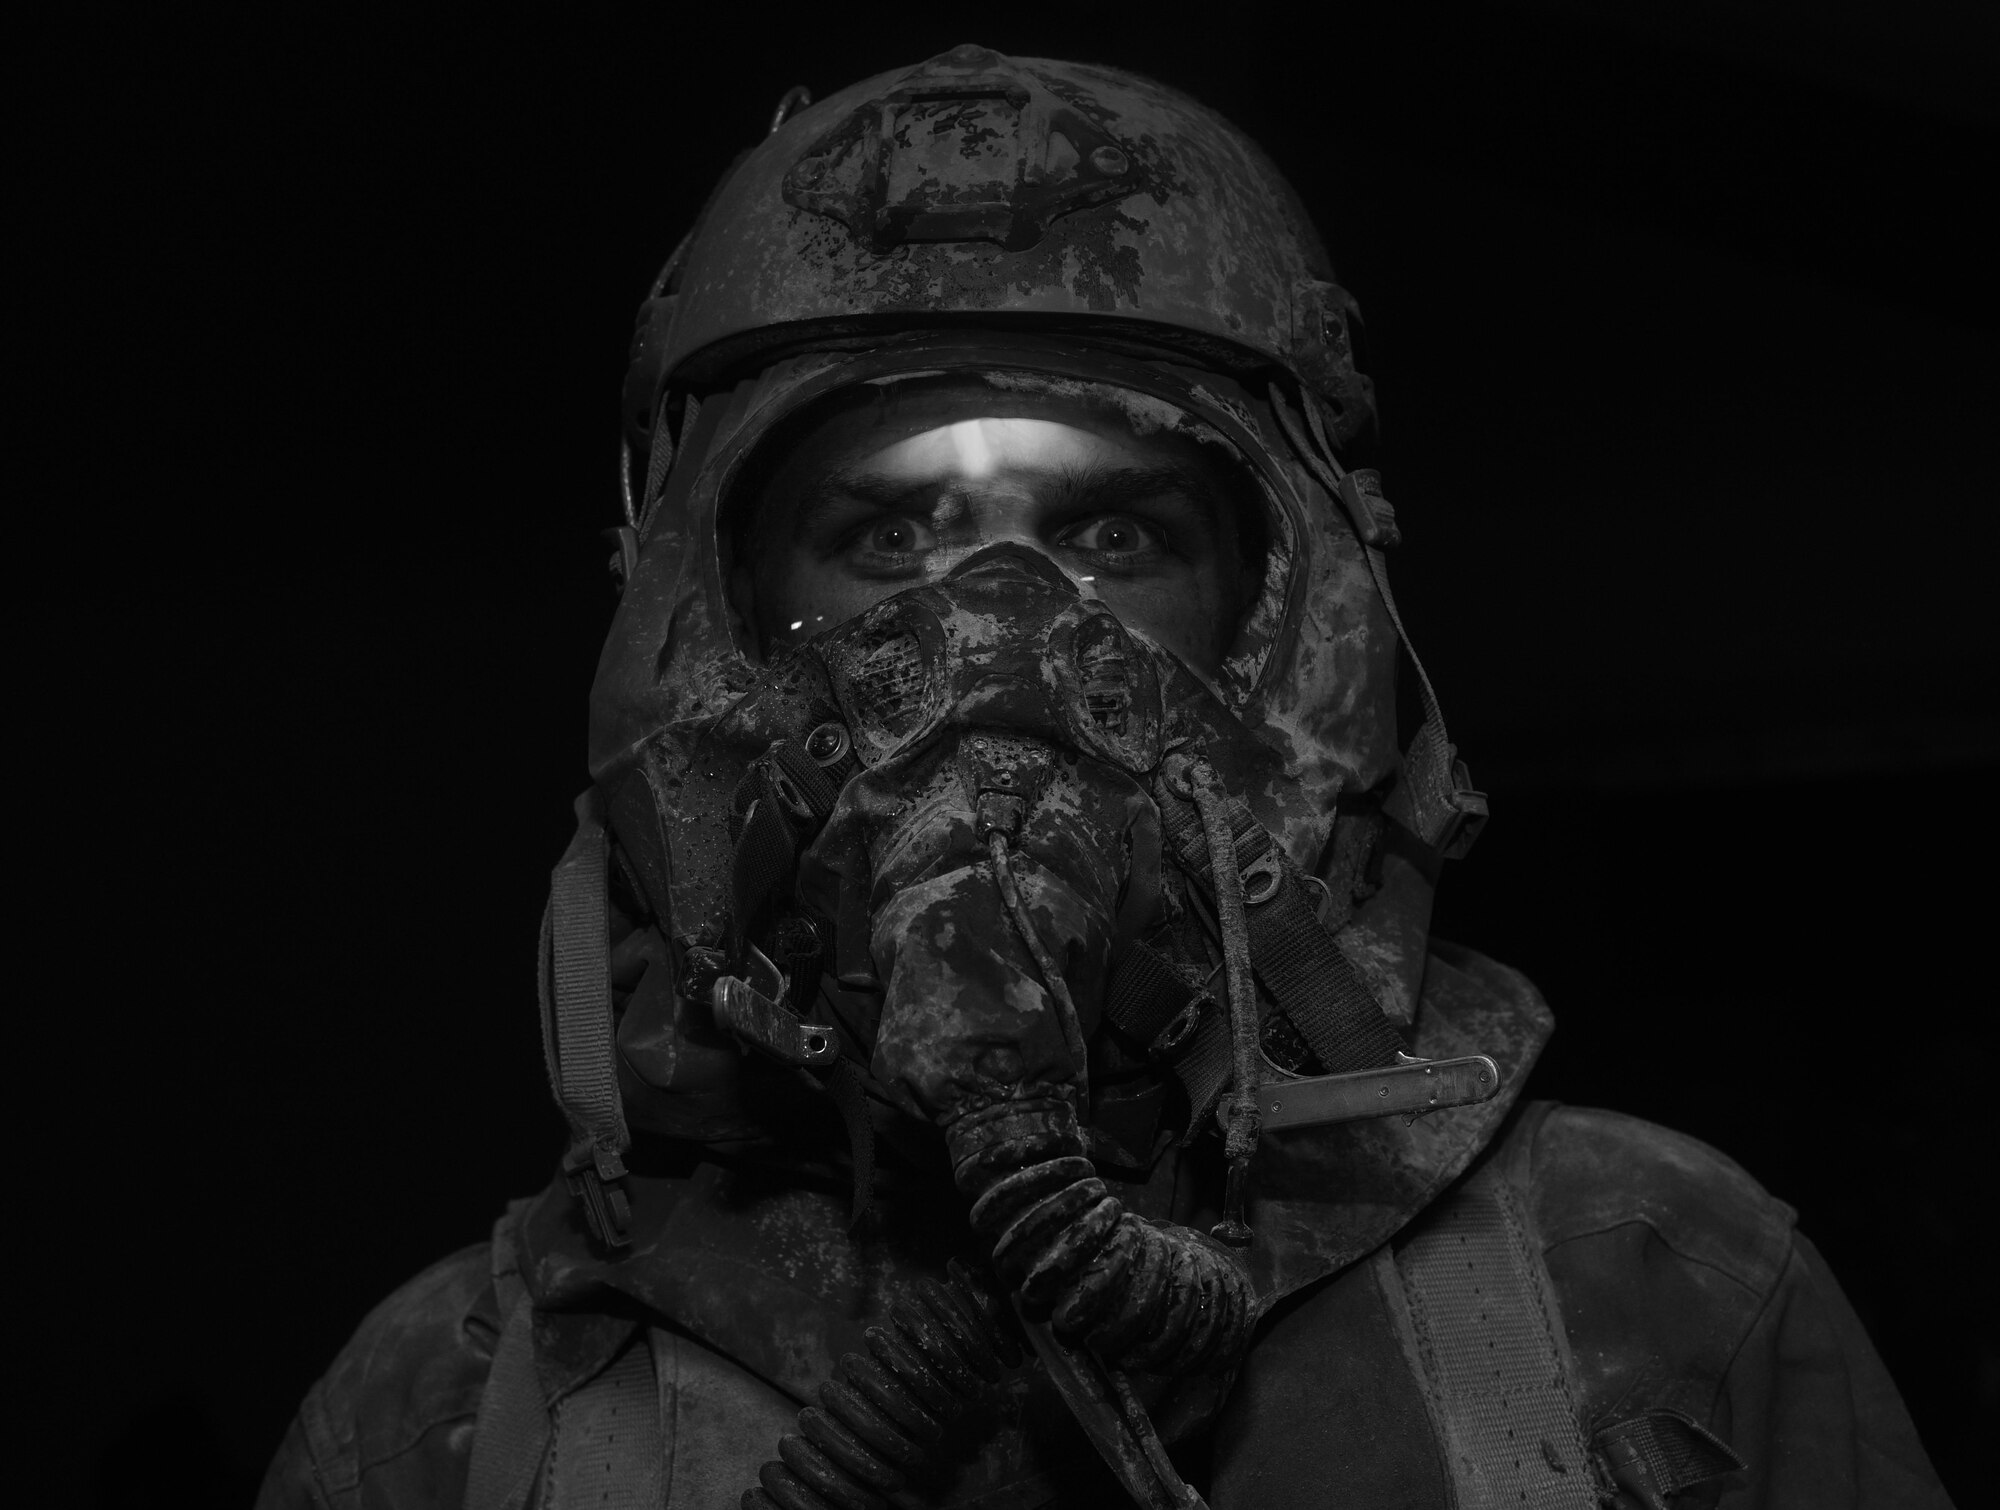 An aircrew member goes through a simulated decontamination line at Hurlburt Field, Fla., June 9, 2016. Air Force Special Operations Command’s operations directorate ran a realistic, scenario-based, training program for 16 Airmen from eight southern United States bases. (U.S. Air Force photo/Staff Sgt. Melanie Holochwost)